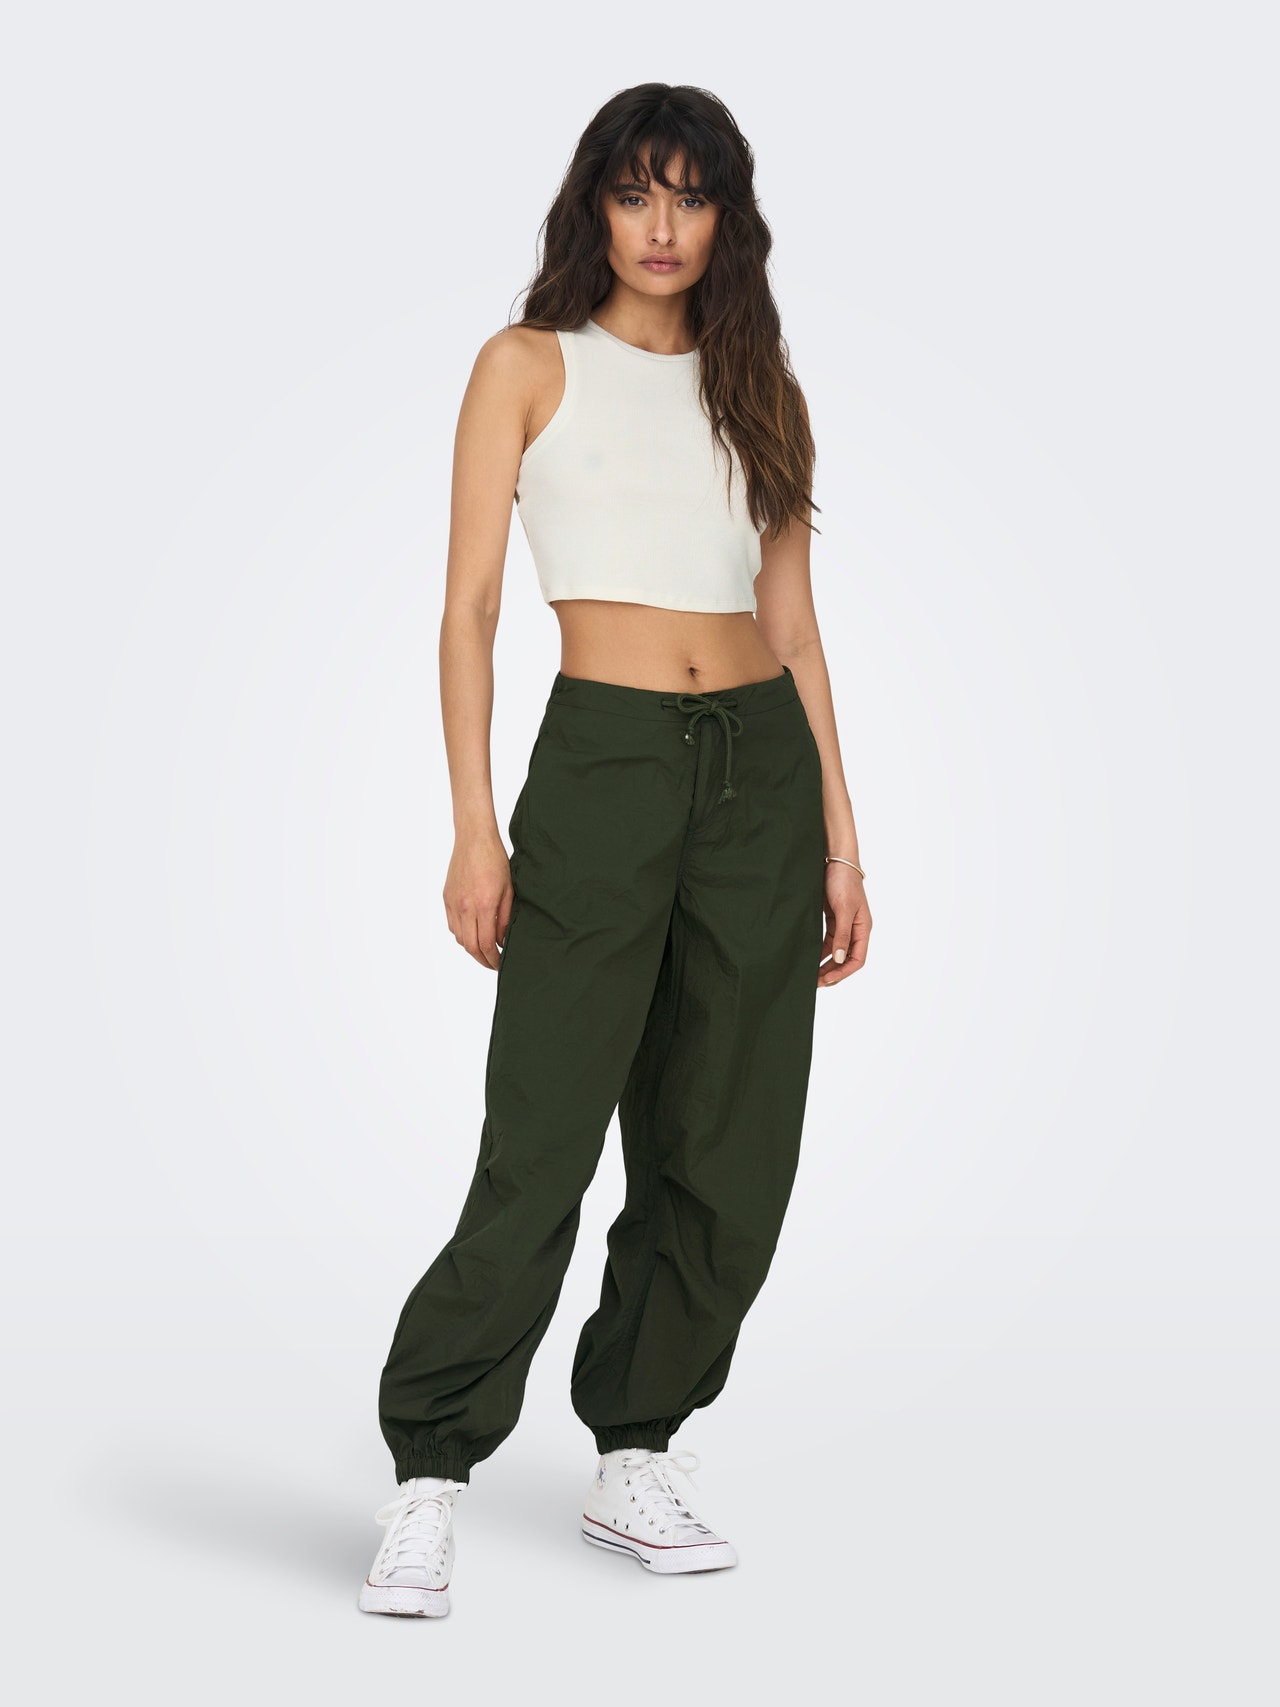 https://images.only.com/15295049/4234052/005/only-cargofitlowwaistfittedhemscargotrousers-green.jpg?v=49330a966682aa57abe3fc7b44f6f928&format=webp&width=1280&quality=90&key=25-0-3